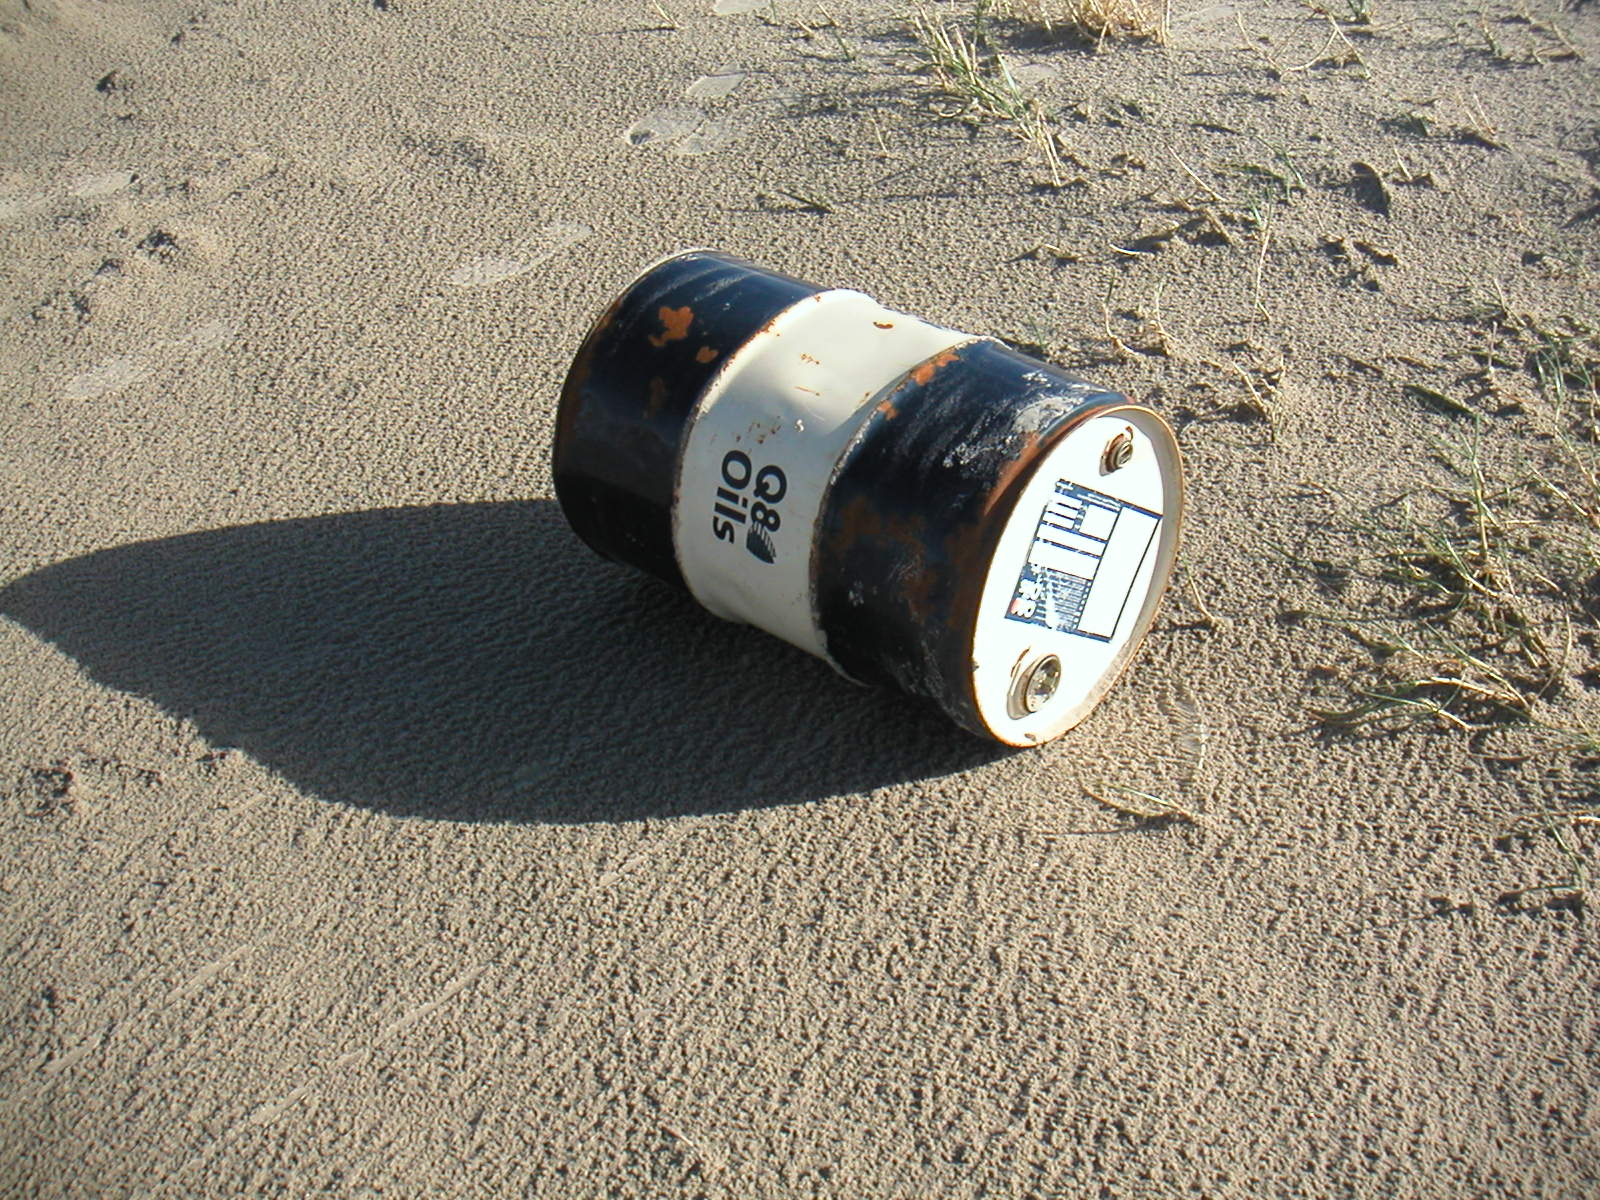 a trash can left in the sand with the side light on